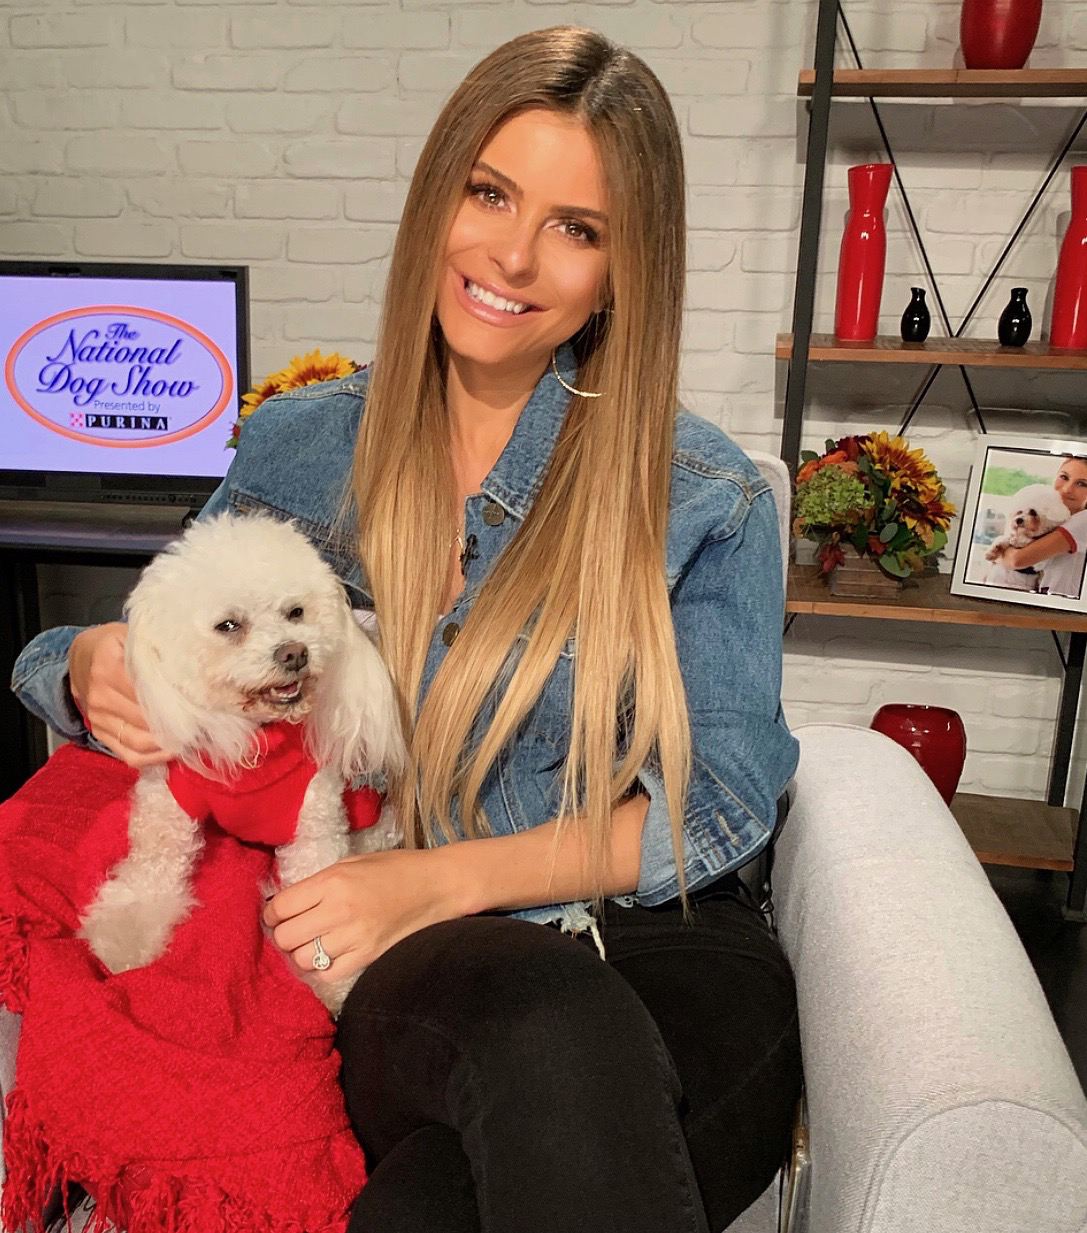 Maria Menounos and her dog Whinnie are teaming up with Purina to thank our pets through this year’s #DogThanking movement in celebration of Thanksgiving and the National Dog Show Presented by Purina.